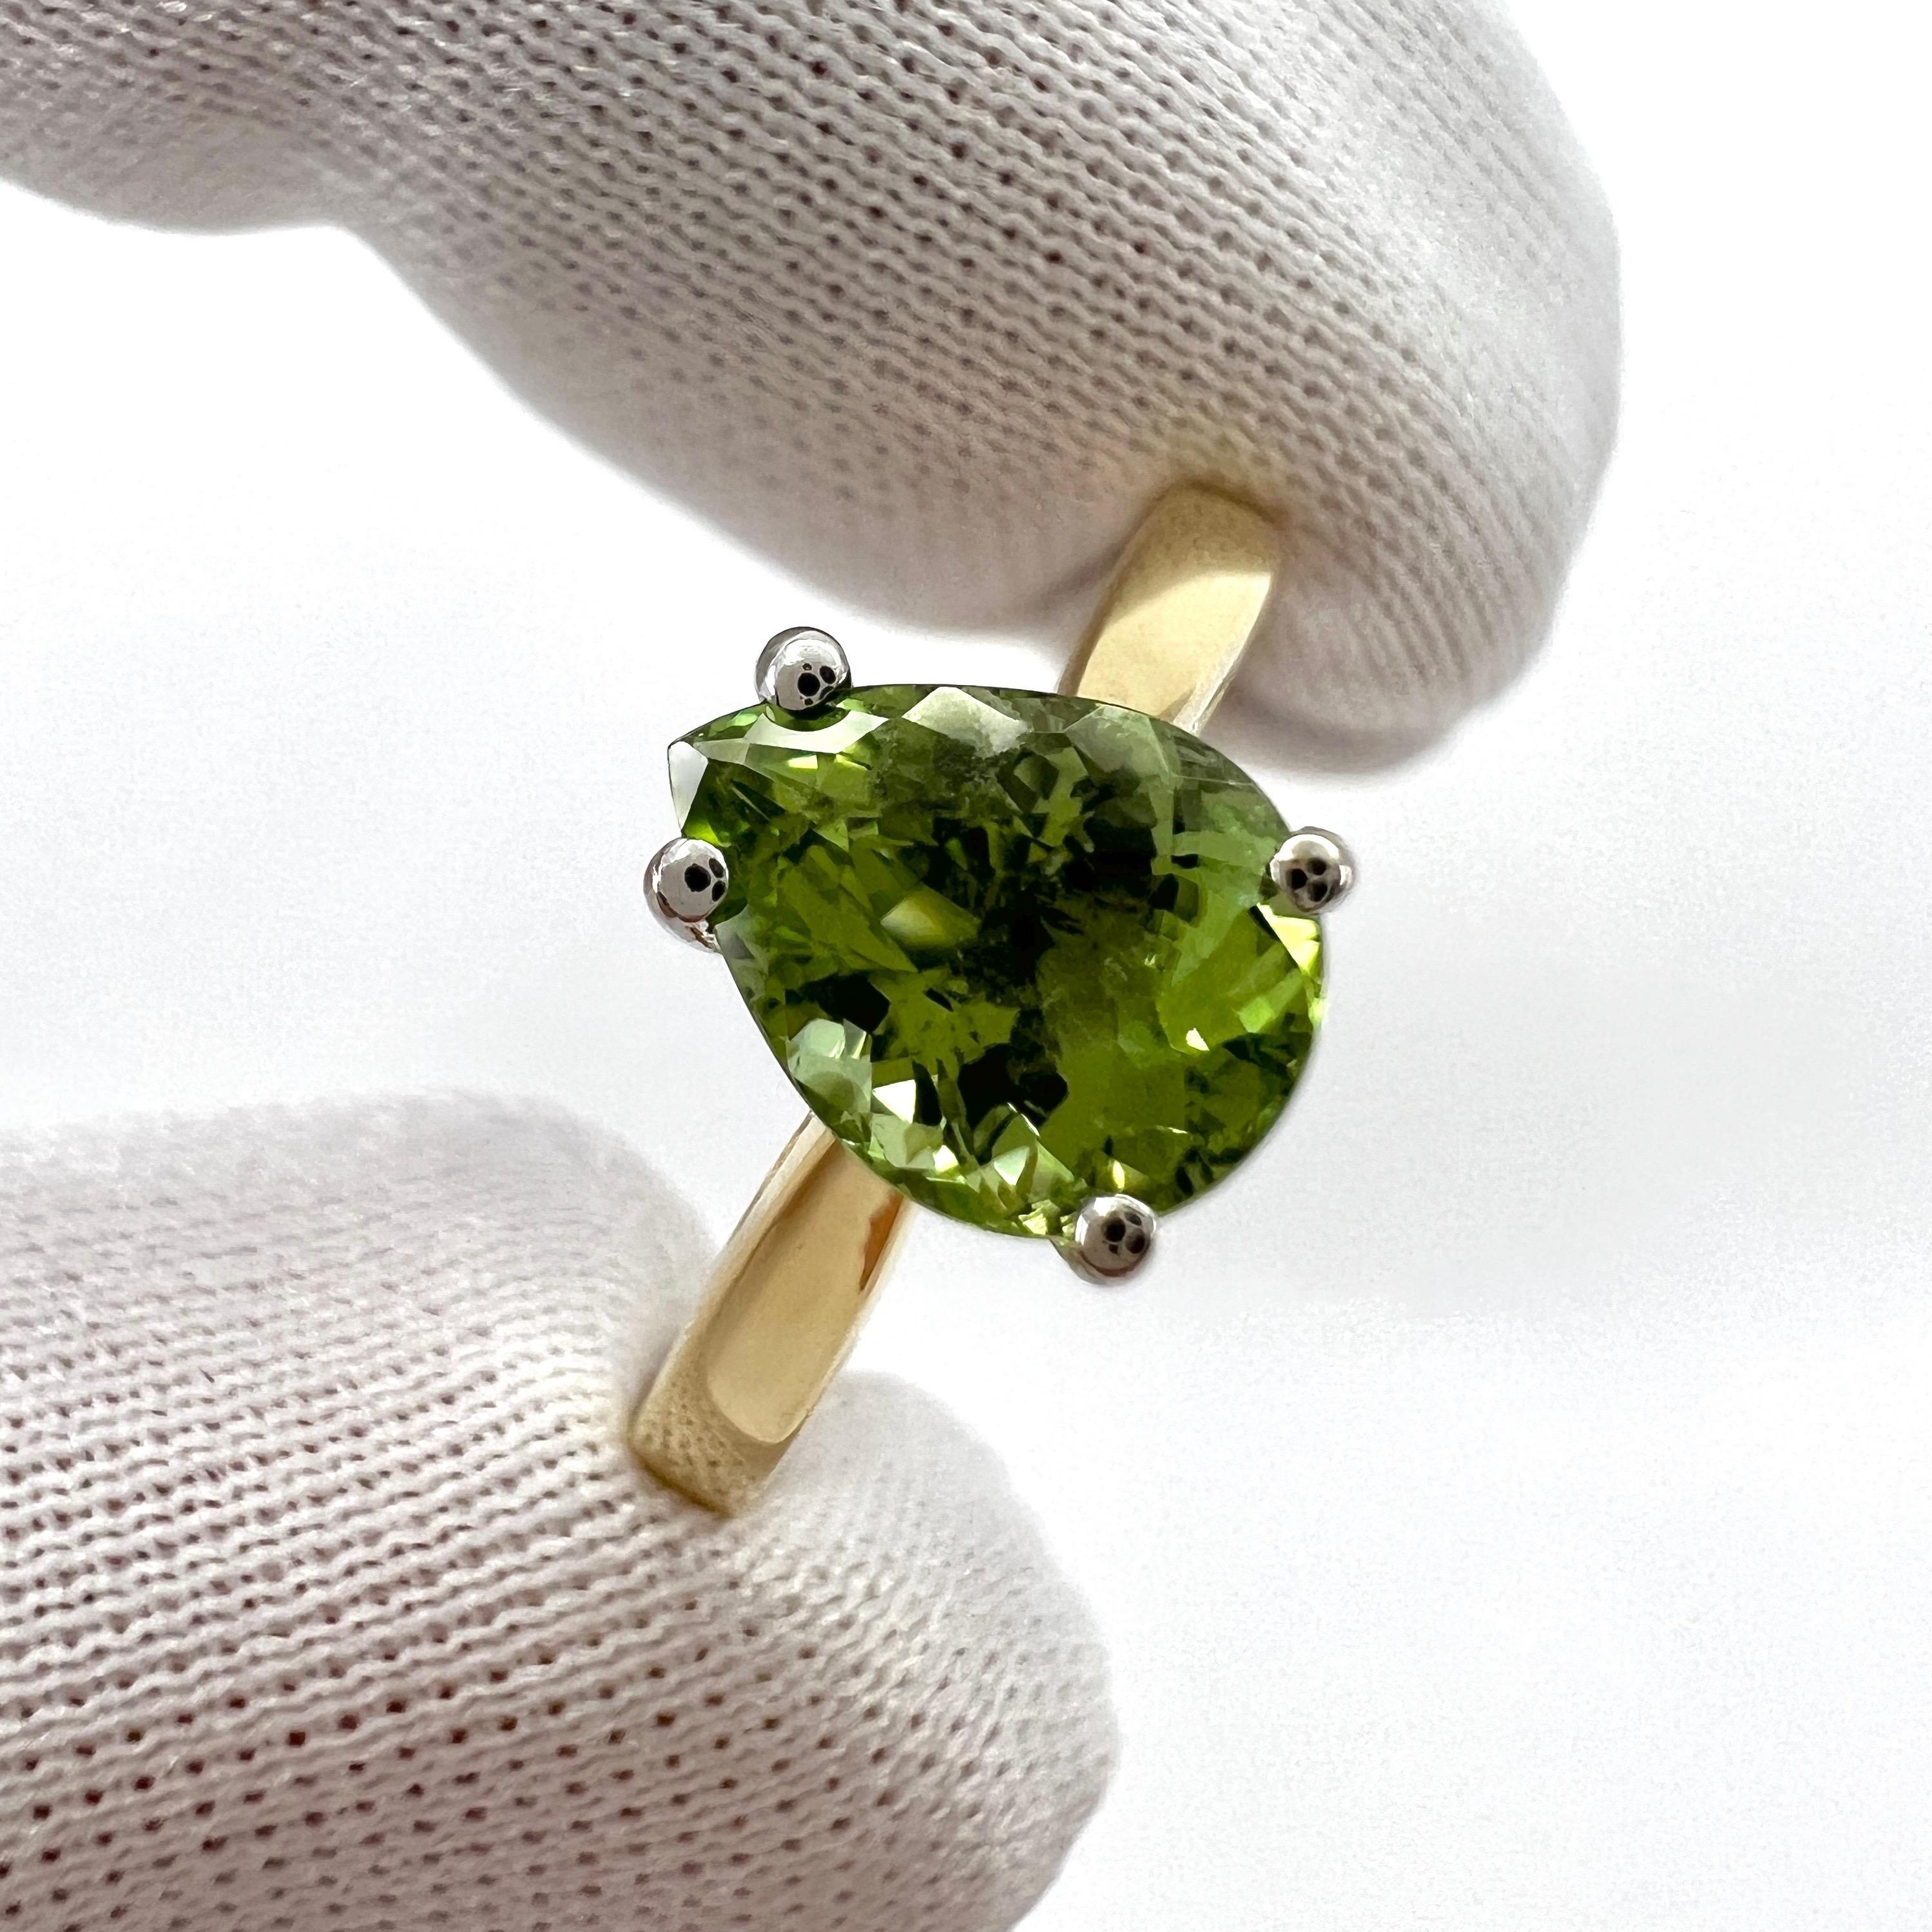 Light Green Tourmaline Pear Cut 18k Yellow And White Gold Solitaire Ring.

1.31 Carat tourmaline with a stunning light green colour and good clarity. Clean stone, with only some small natural inclusions visible when looking closely.

Also has a very